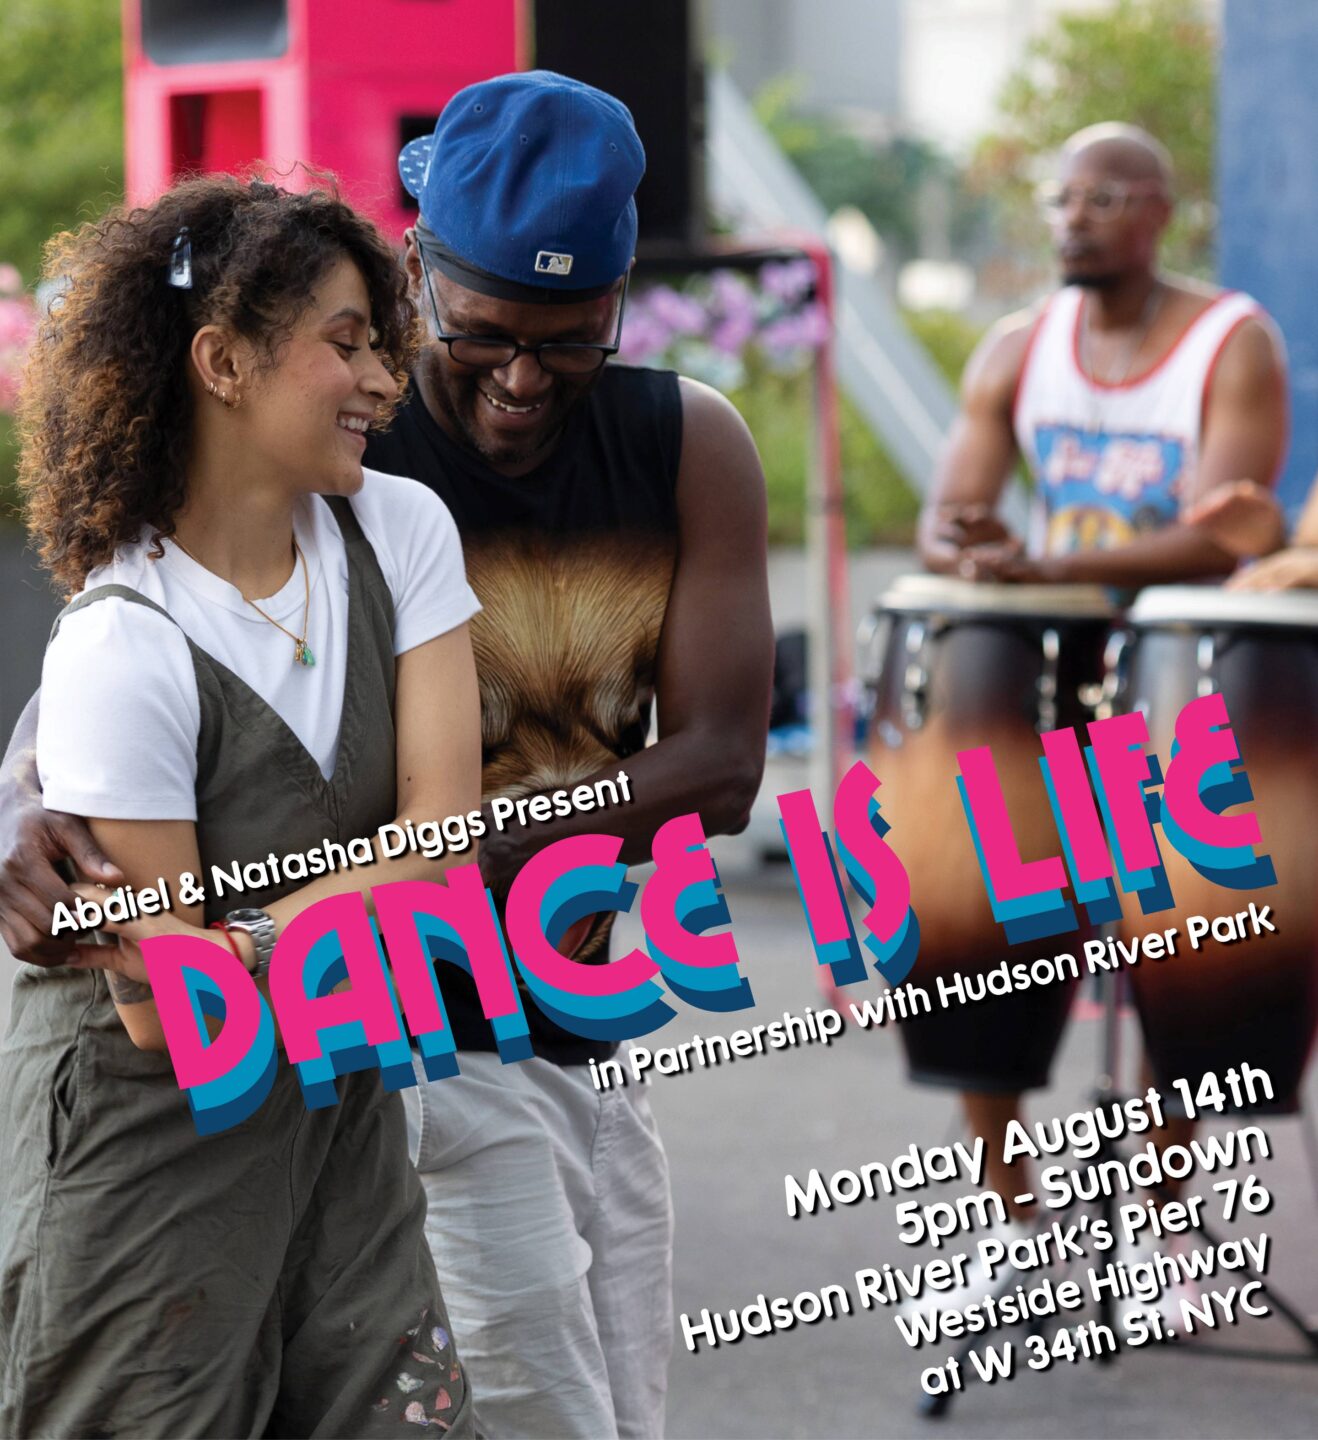 A flyer for the Dance is Life event at Pier 76 in Hudson River Park August 14 from 5:00 to 9:00 PM. A photo shows two people dancing to live music.